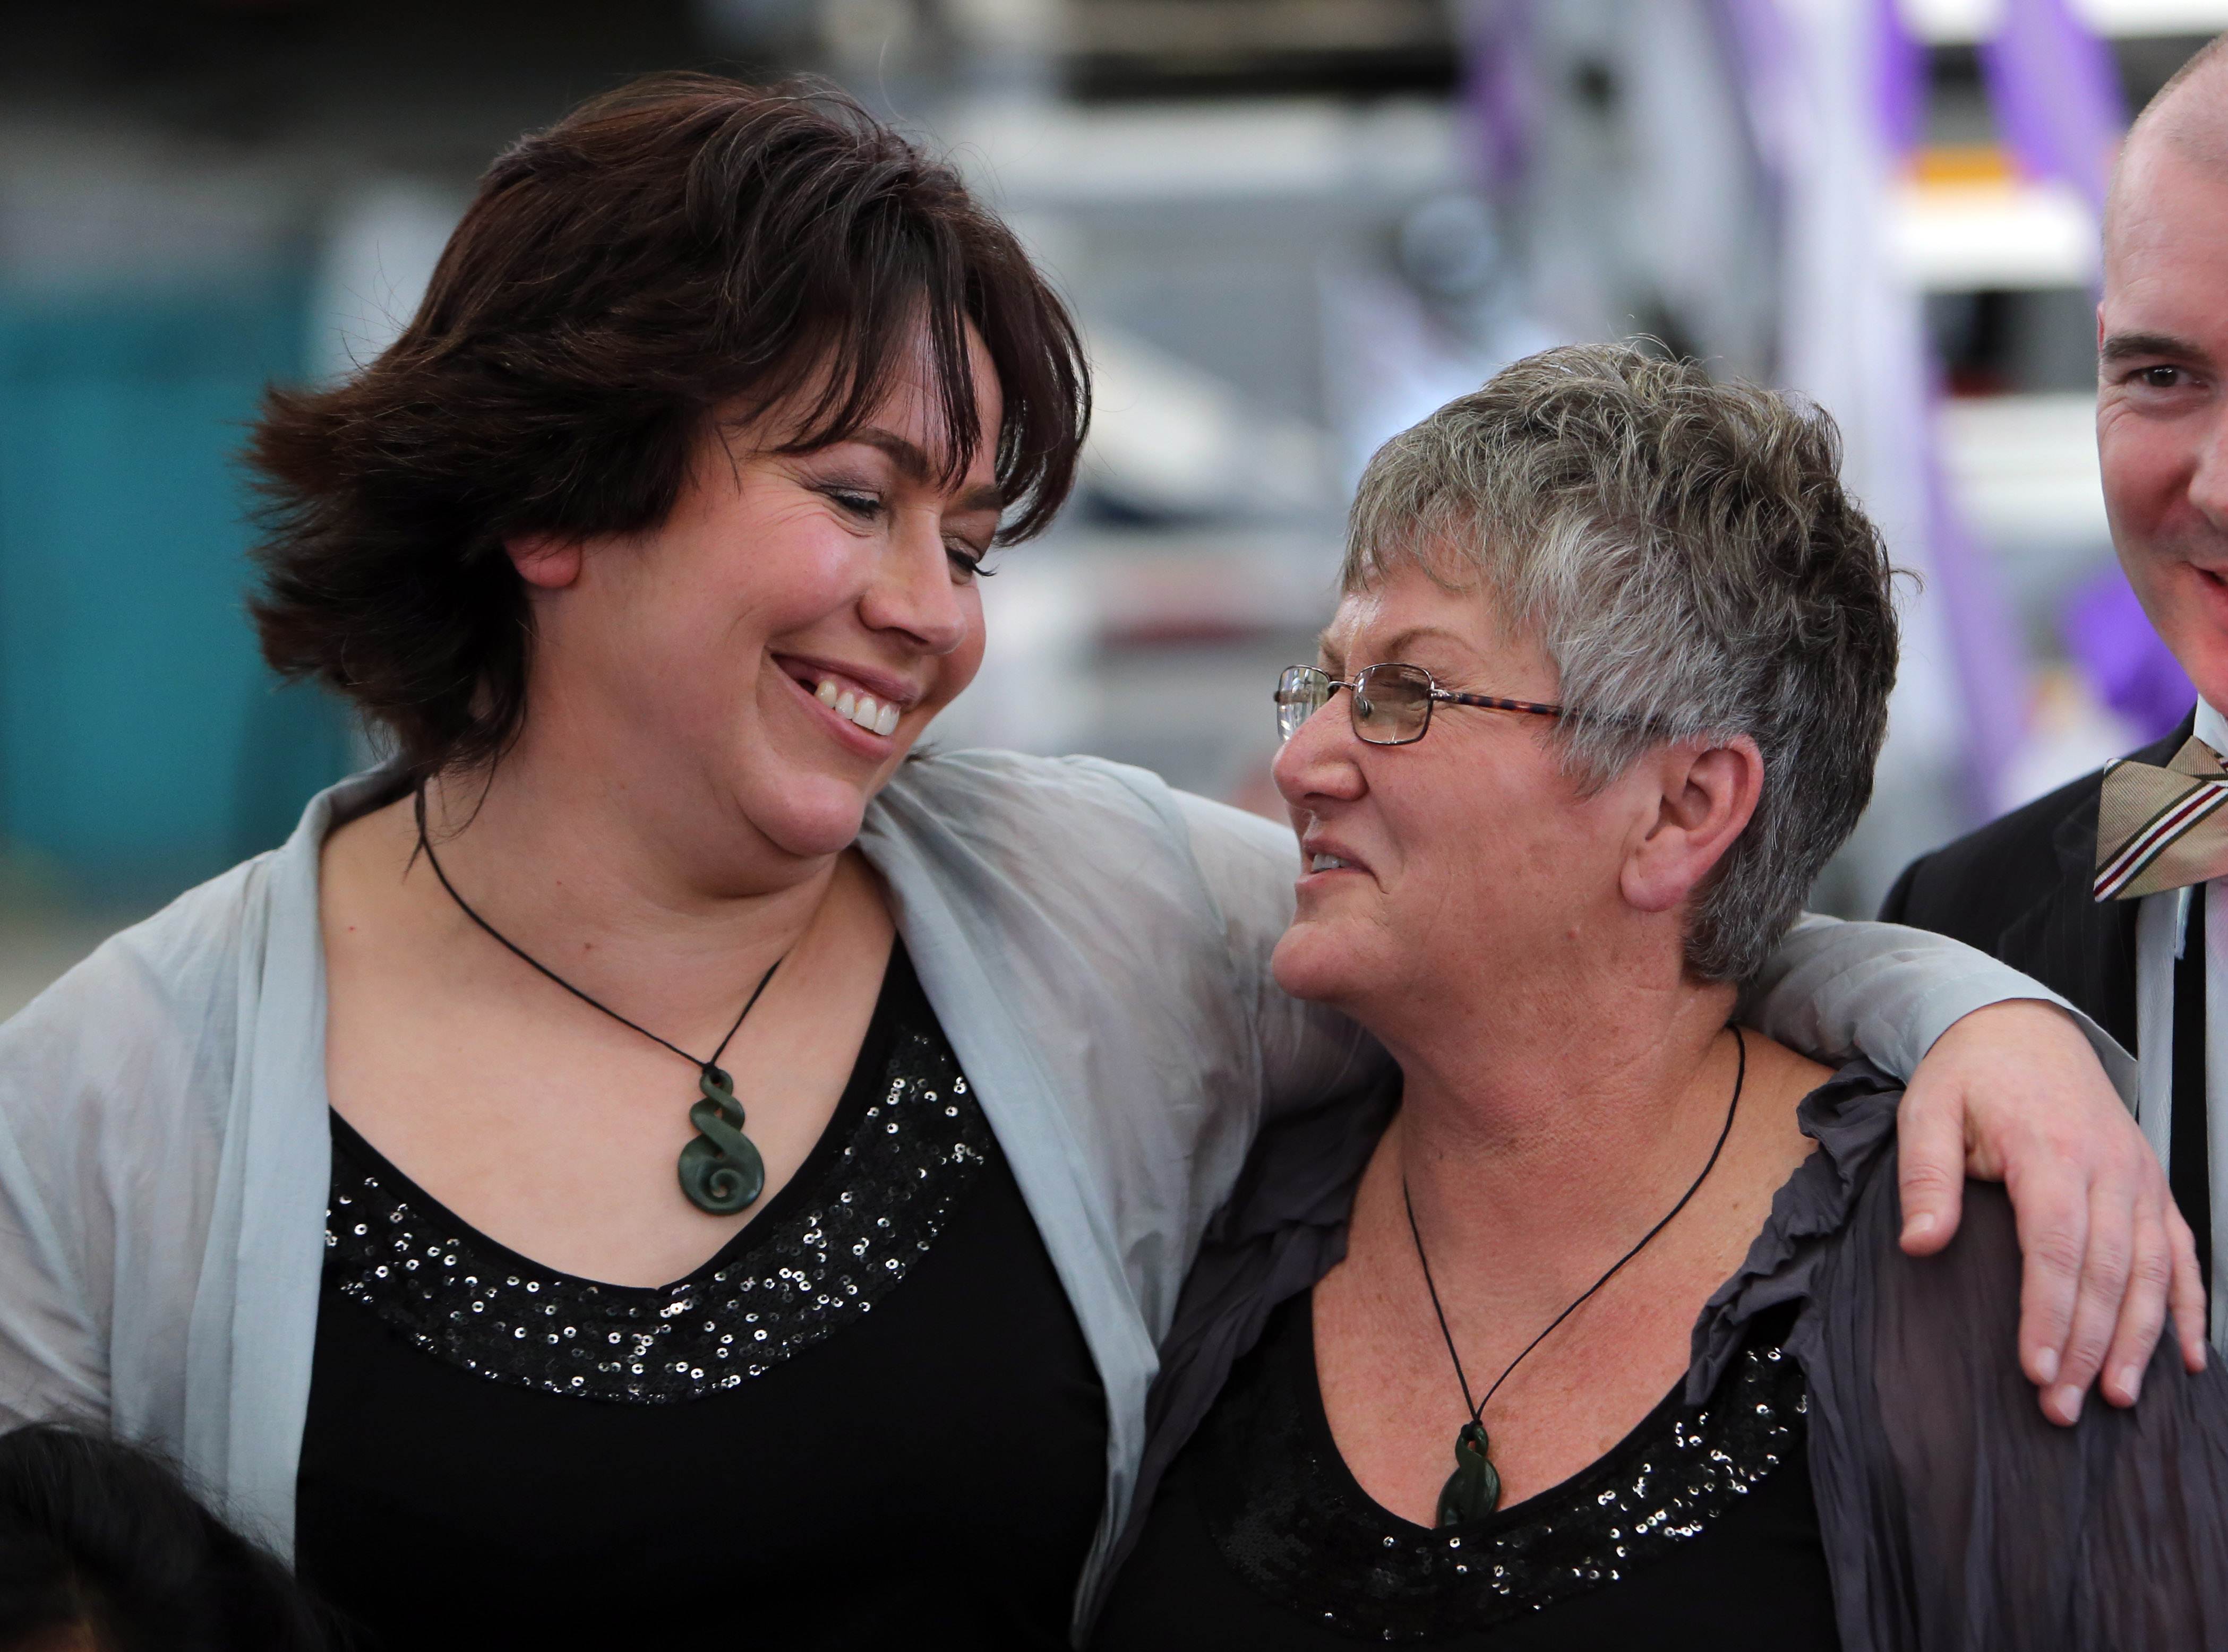 Lynley Bendall (L) and Ally Wanikau. Photo: AFP